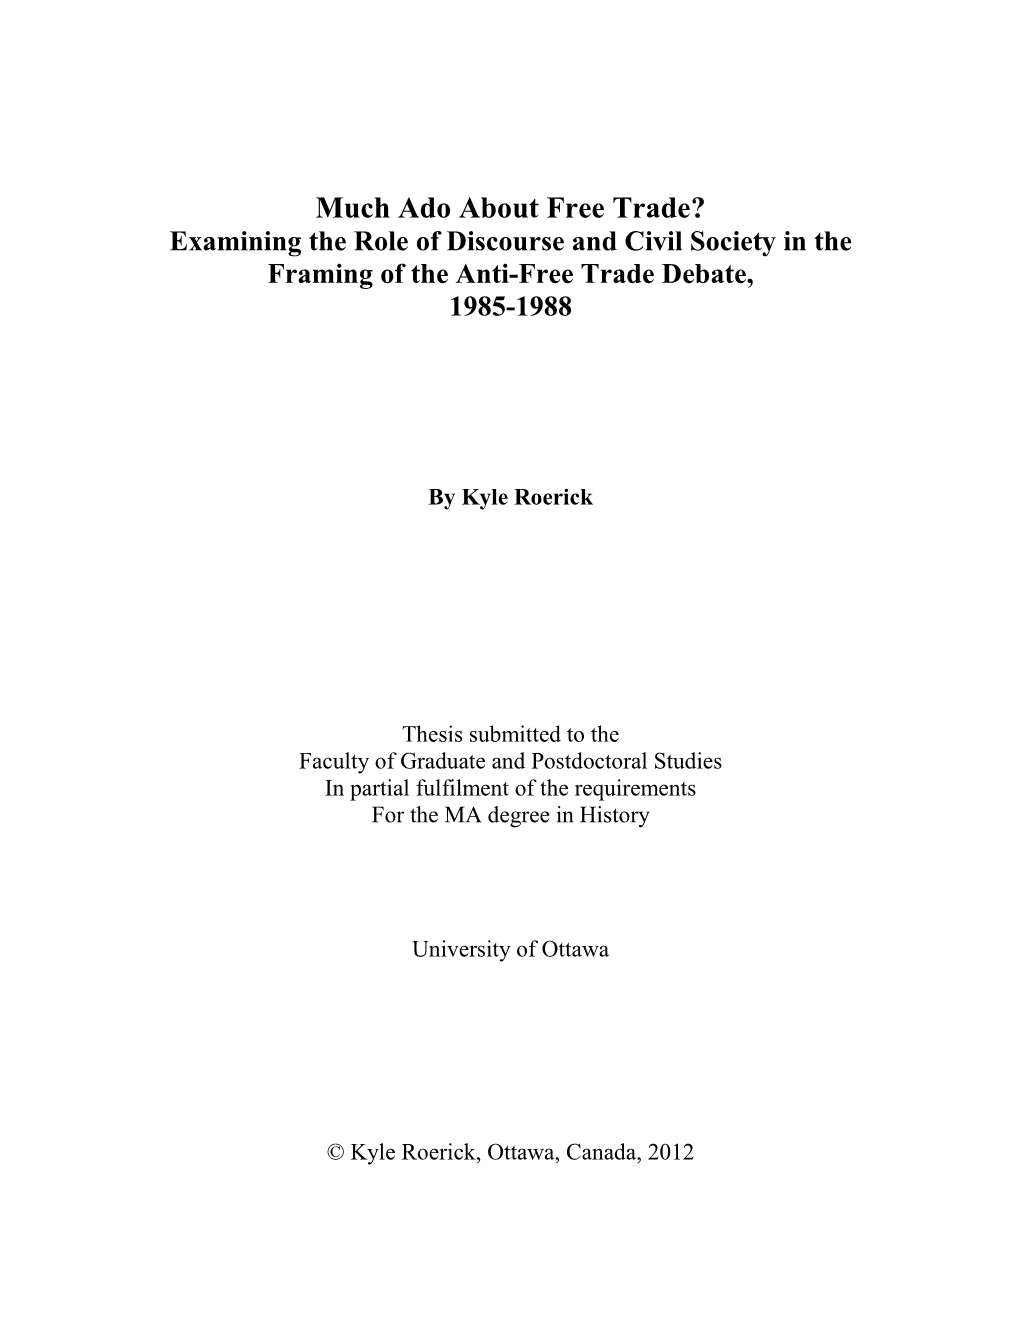 Much Ado About Free Trade? Examining the Role of Discourse and Civil Society in the Framing of the Anti-Free Trade Debate, 1985-1988